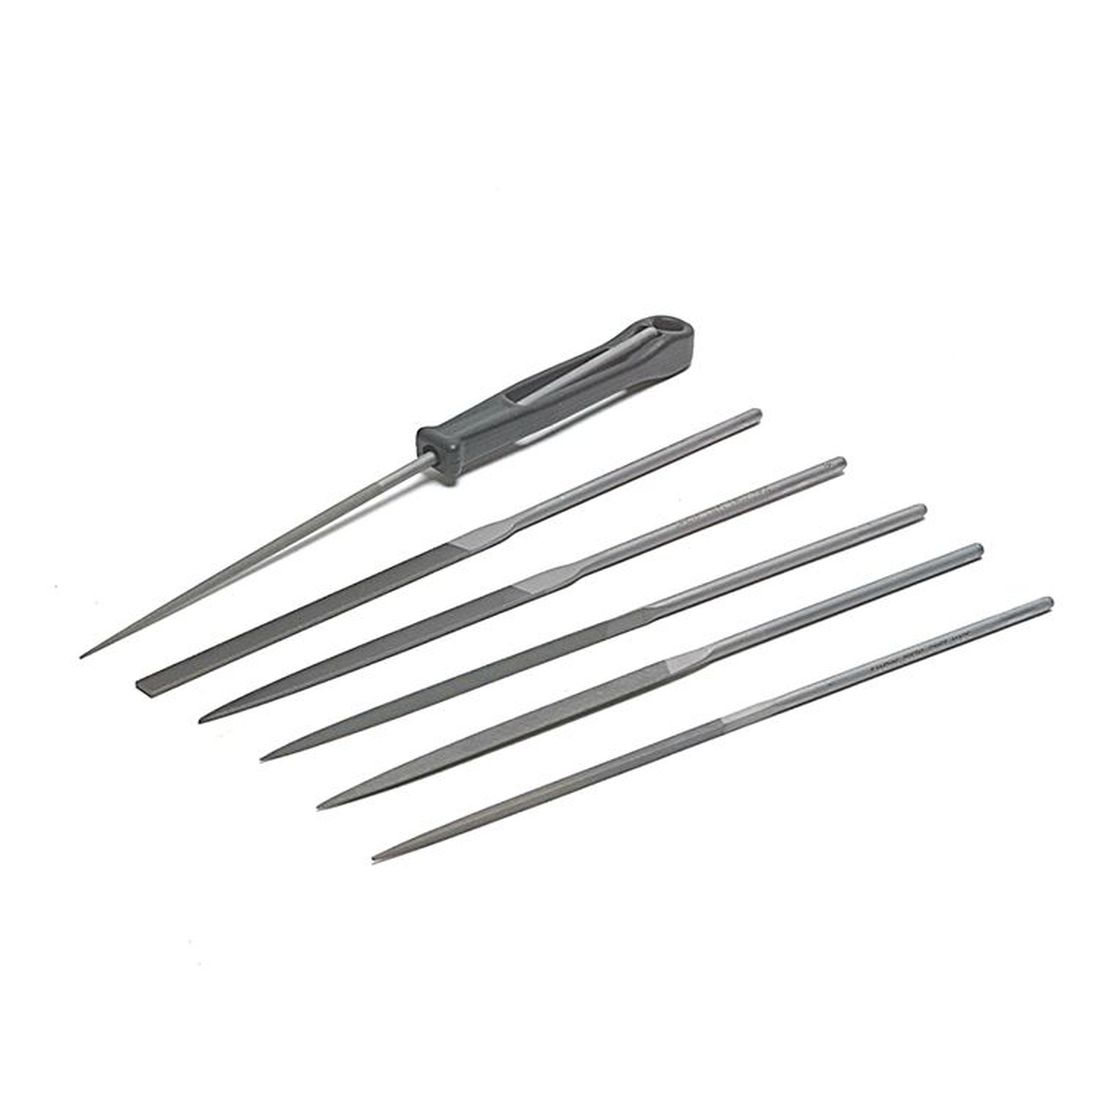 Bahco 2-470-16-2-0 Needle File Set of 6 Cut 2 Smooth 160mm (6.2in)                    